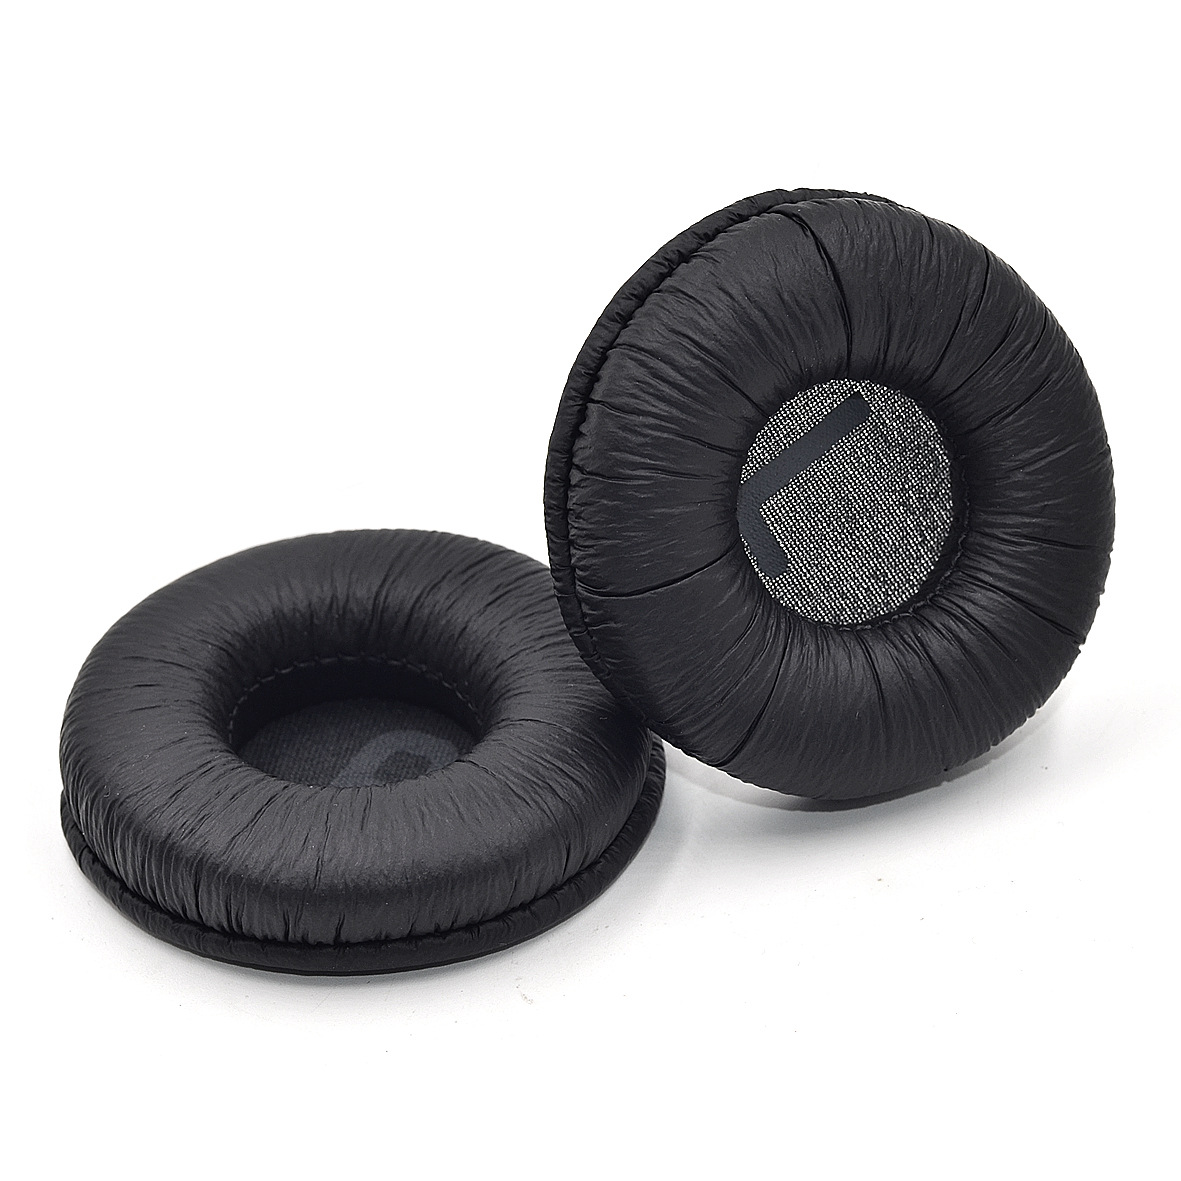 Replacement Ear Pads Cushions For JBL JR300 T450BT T500BT Tune600 Headphone